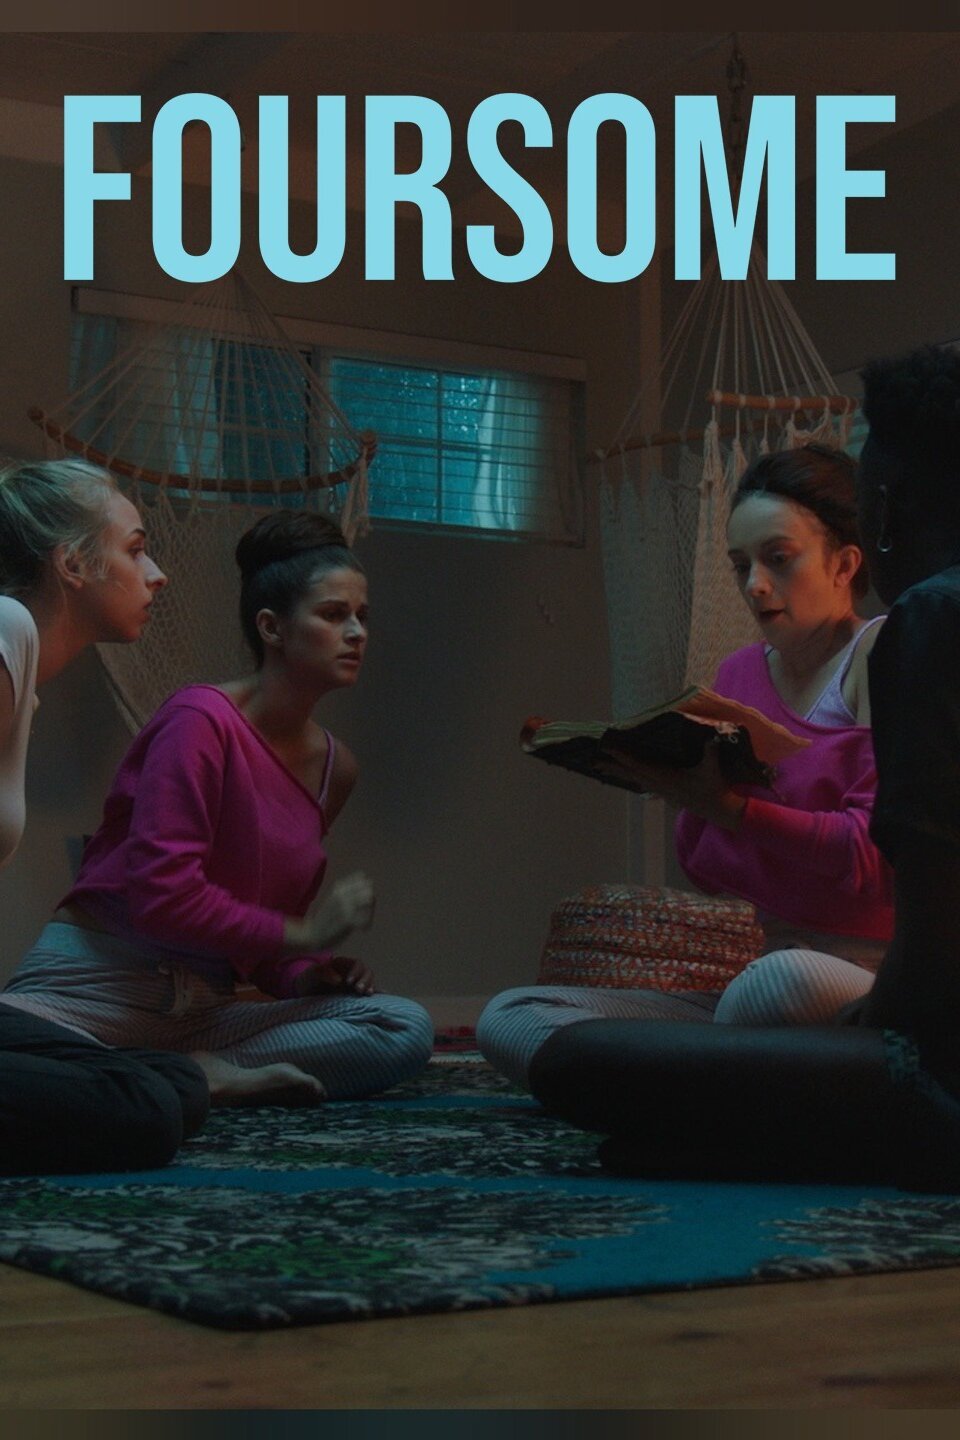 dave inskeep recommends Foursome S2 Episode 2